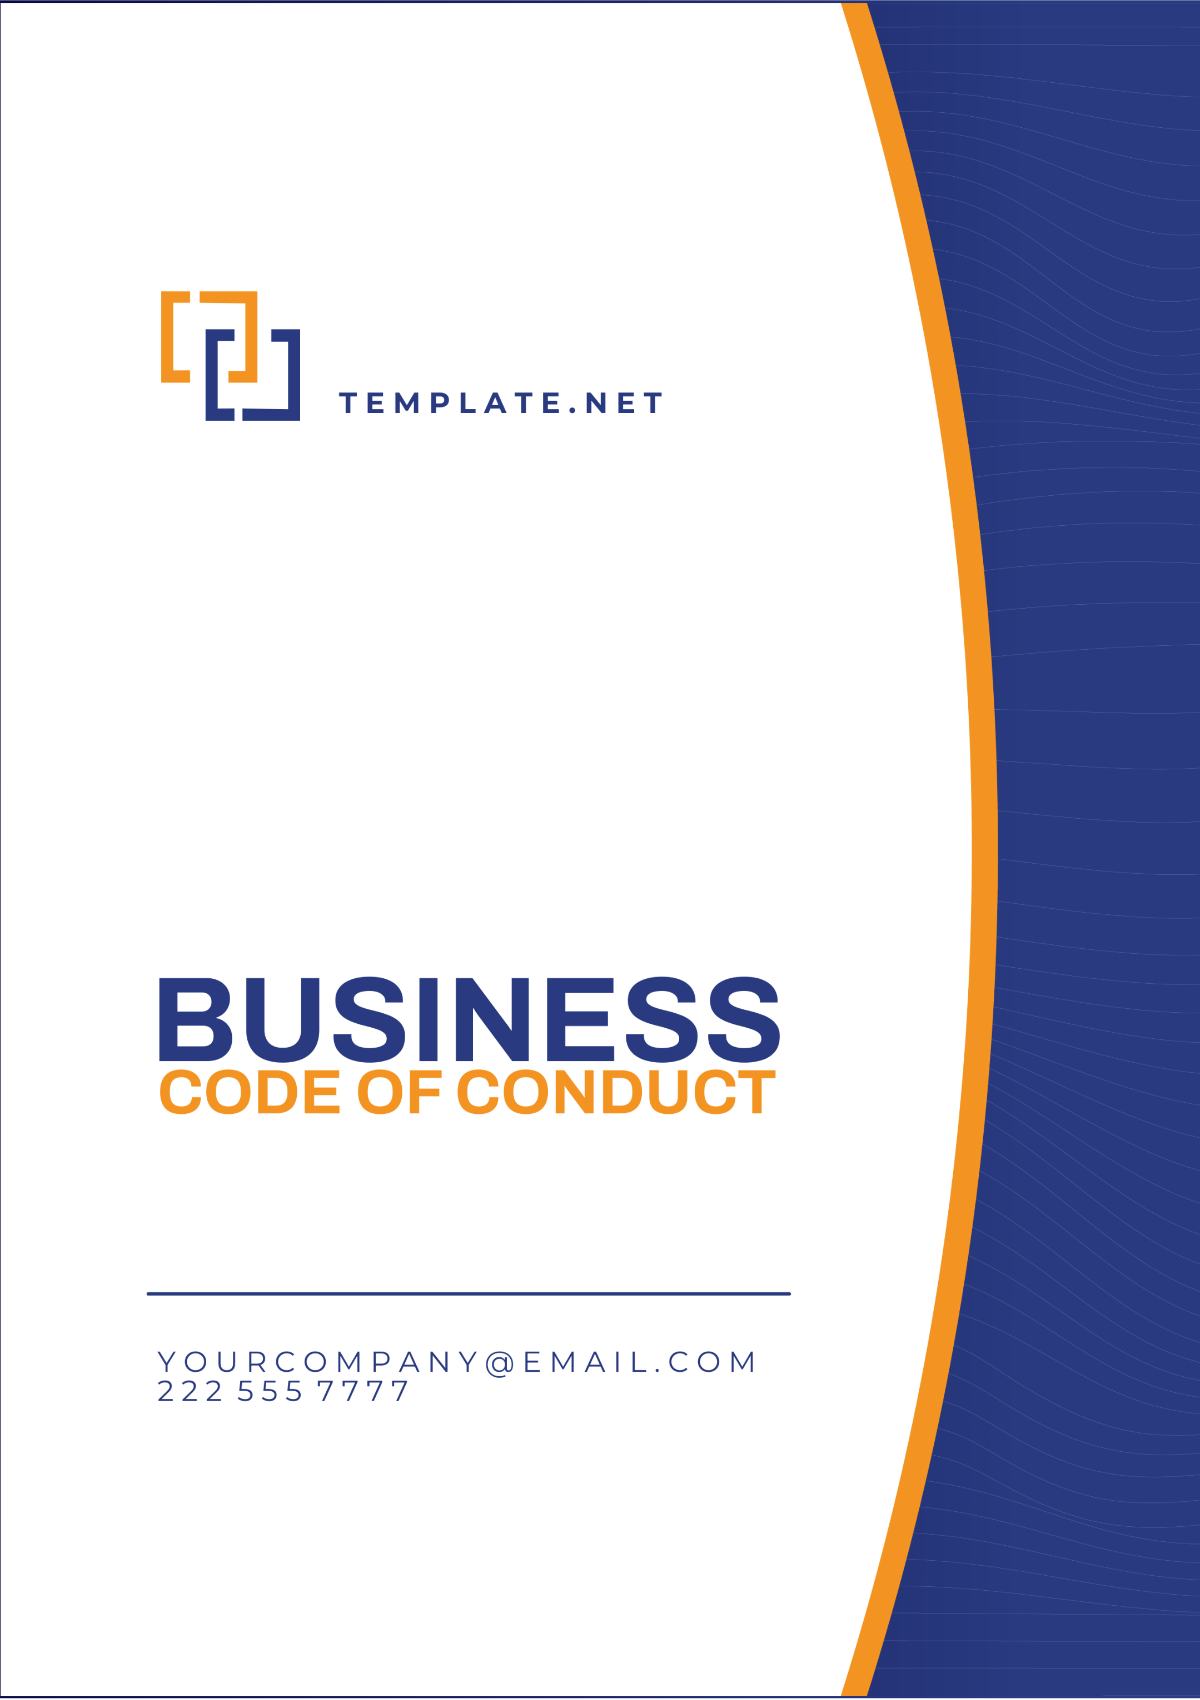 Business Code of Conduct Template